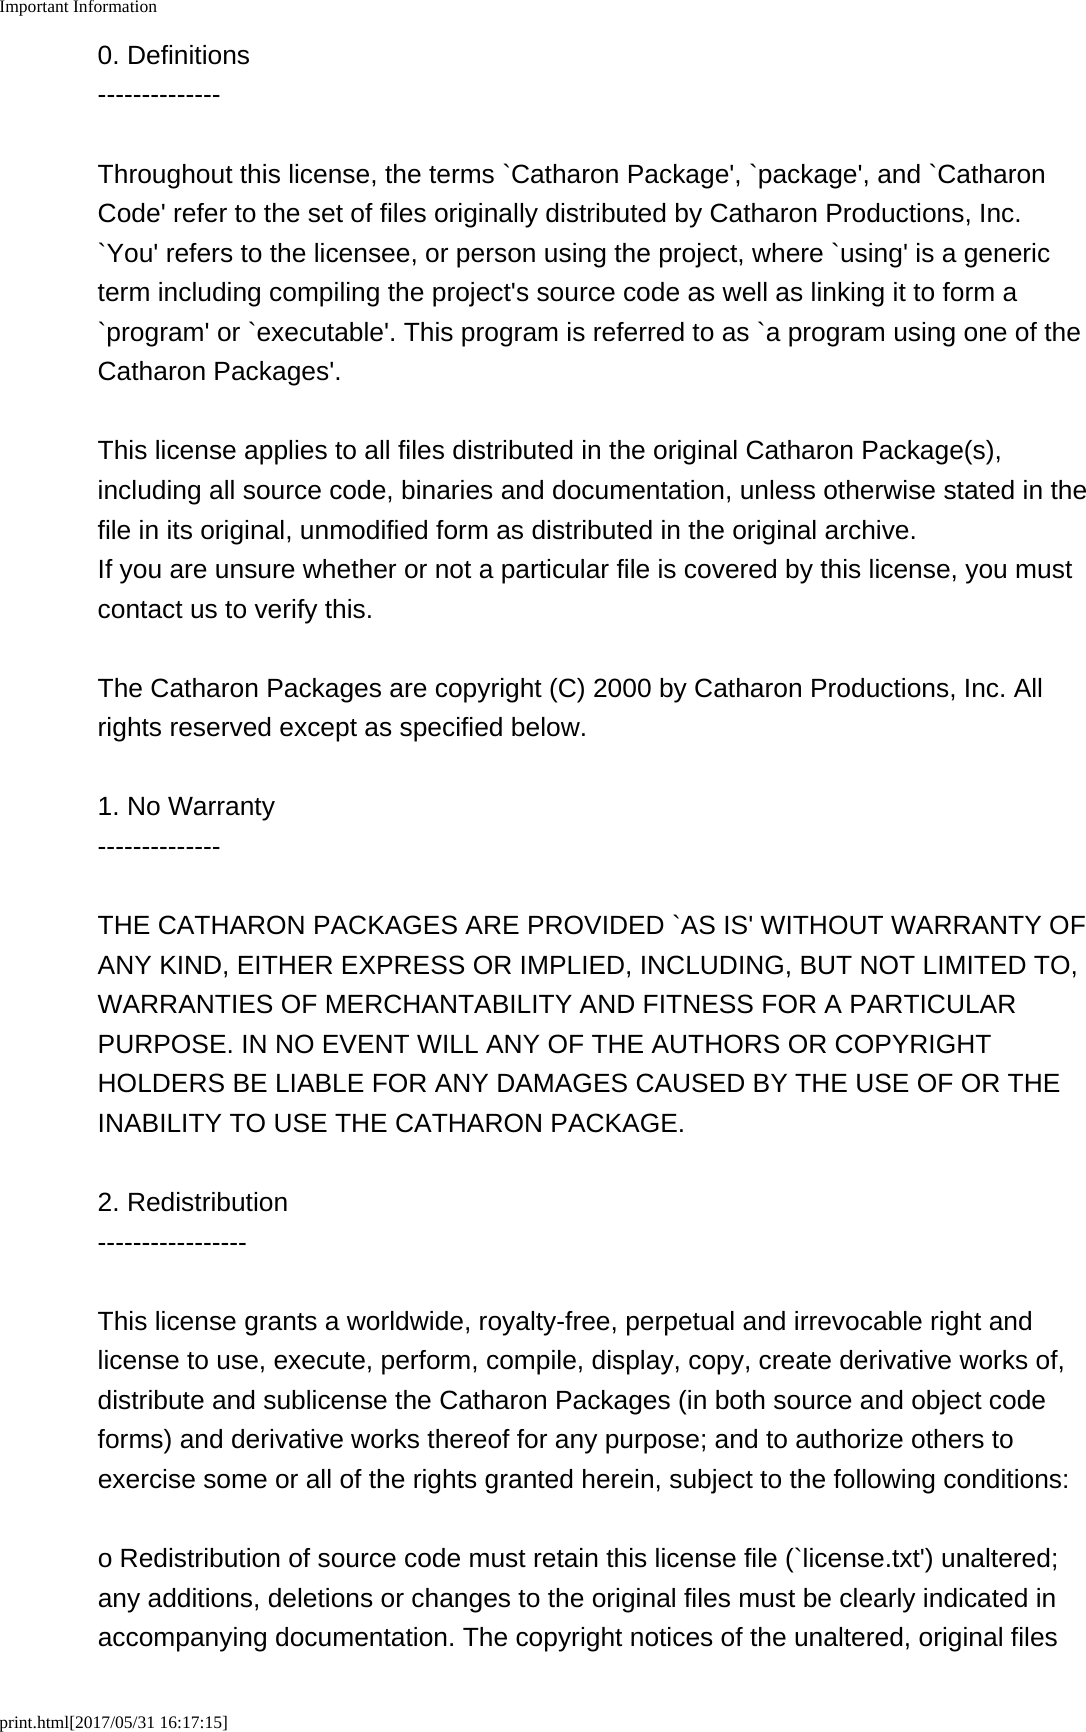 Important Informationprint.html[2017/05/31 16:17:15]0. Definitions--------------Throughout this license, the terms `Catharon Package&apos;, `package&apos;, and `CatharonCode&apos; refer to the set of files originally distributed by Catharon Productions, Inc. `You&apos; refers to the licensee, or person using the project, where `using&apos; is a genericterm including compiling the project&apos;s source code as well as linking it to form a`program&apos; or `executable&apos;. This program is referred to as `a program using one of theCatharon Packages&apos;.This license applies to all files distributed in the original Catharon Package(s),including all source code, binaries and documentation, unless otherwise stated in thefile in its original, unmodified form as distributed in the original archive. If you are unsure whether or not a particular file is covered by this license, you mustcontact us to verify this.The Catharon Packages are copyright (C) 2000 by Catharon Productions, Inc. Allrights reserved except as specified below.1. No Warranty--------------THE CATHARON PACKAGES ARE PROVIDED `AS IS&apos; WITHOUT WARRANTY OFANY KIND, EITHER EXPRESS OR IMPLIED, INCLUDING, BUT NOT LIMITED TO,WARRANTIES OF MERCHANTABILITY AND FITNESS FOR A PARTICULARPURPOSE. IN NO EVENT WILL ANY OF THE AUTHORS OR COPYRIGHTHOLDERS BE LIABLE FOR ANY DAMAGES CAUSED BY THE USE OF OR THEINABILITY TO USE THE CATHARON PACKAGE.2. Redistribution-----------------This license grants a worldwide, royalty-free, perpetual and irrevocable right andlicense to use, execute, perform, compile, display, copy, create derivative works of,distribute and sublicense the Catharon Packages (in both source and object codeforms) and derivative works thereof for any purpose; and to authorize others toexercise some or all of the rights granted herein, subject to the following conditions:o Redistribution of source code must retain this license file (`license.txt&apos;) unaltered;any additions, deletions or changes to the original files must be clearly indicated inaccompanying documentation. The copyright notices of the unaltered, original files